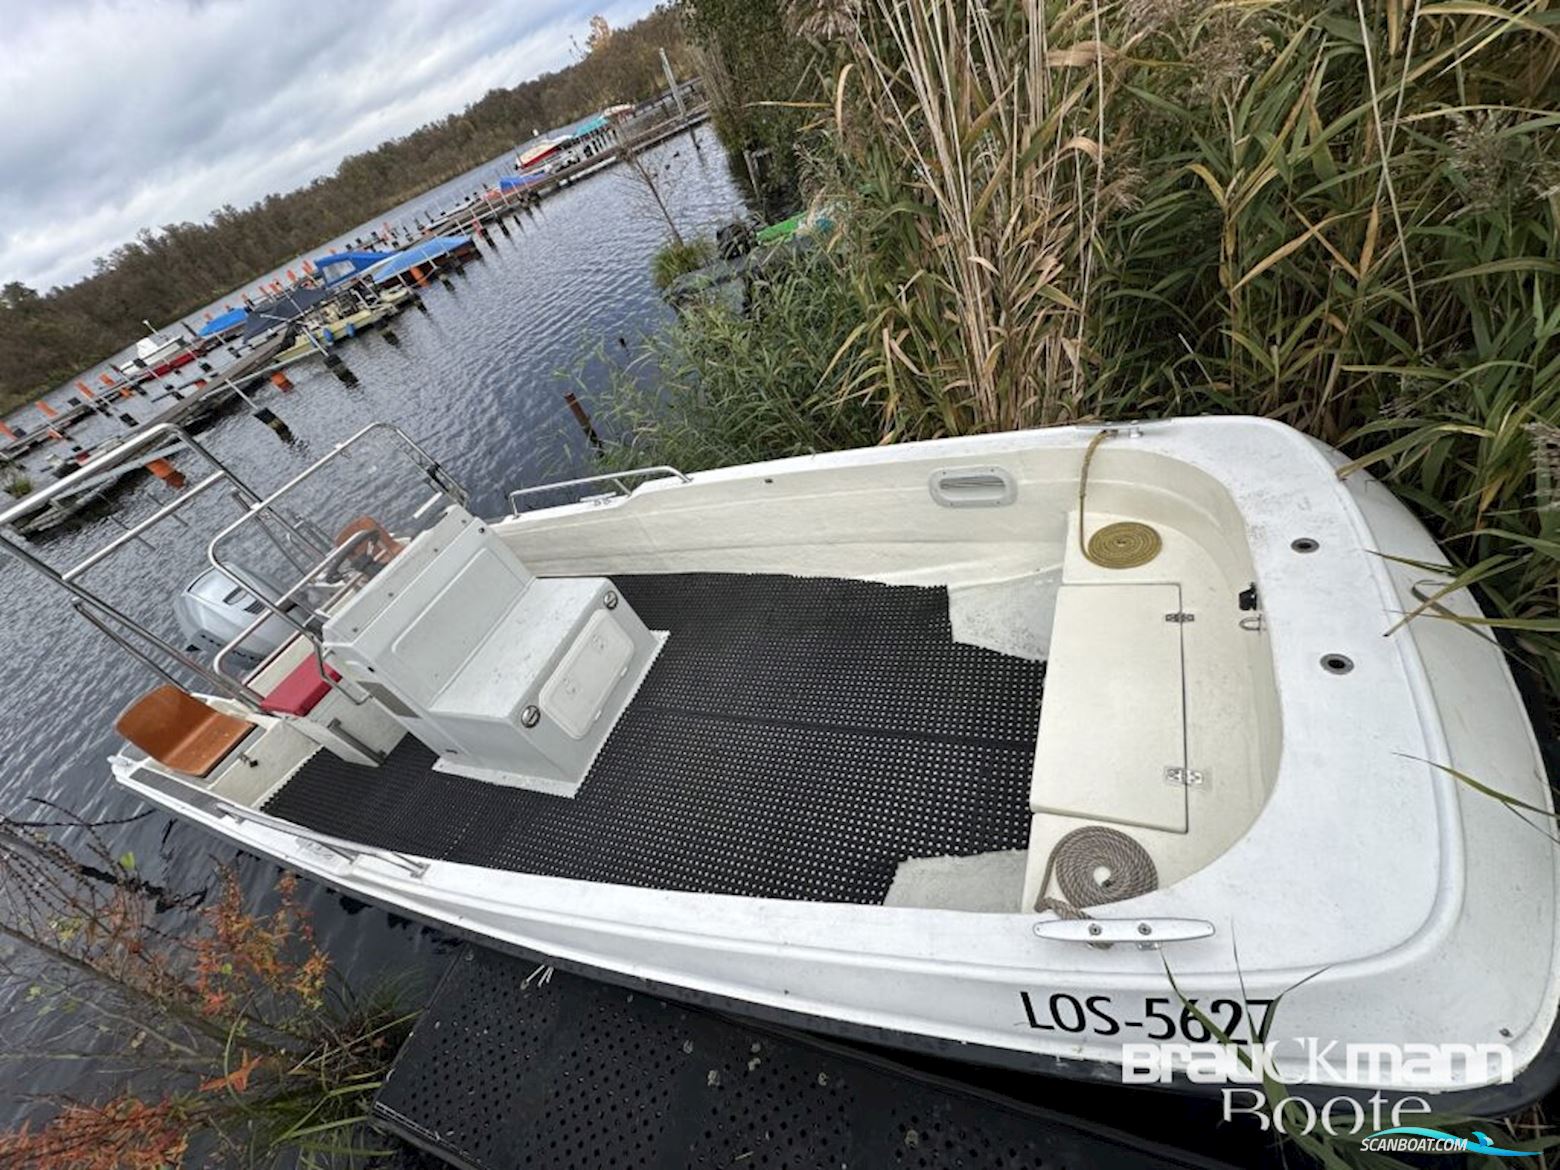 Schlichting Werft 640 Trave Motor boat 2003, with Honda engine, Germany